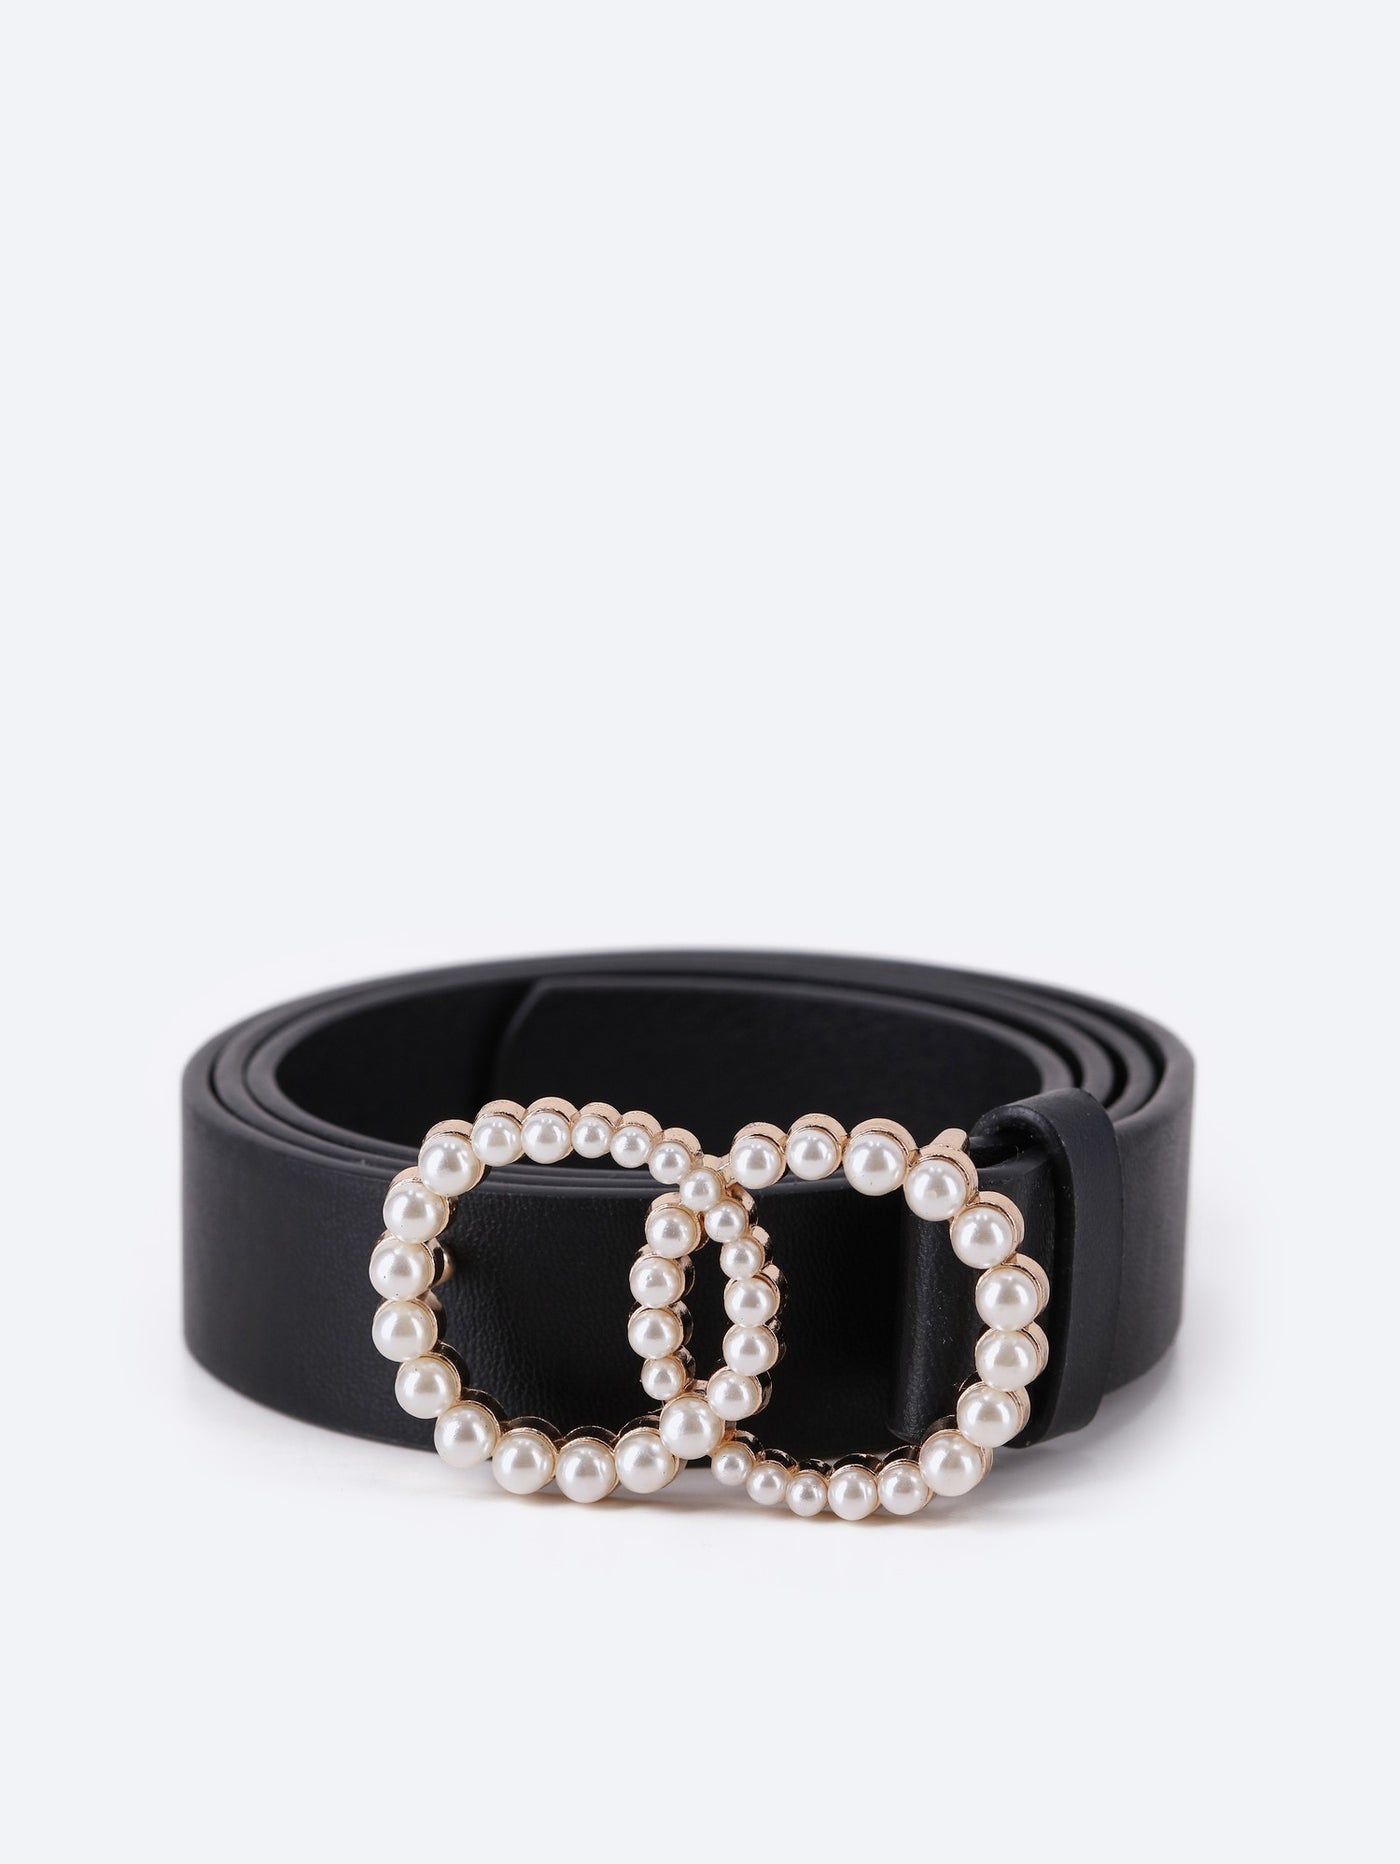 Leather Belt - Pearl Buckle